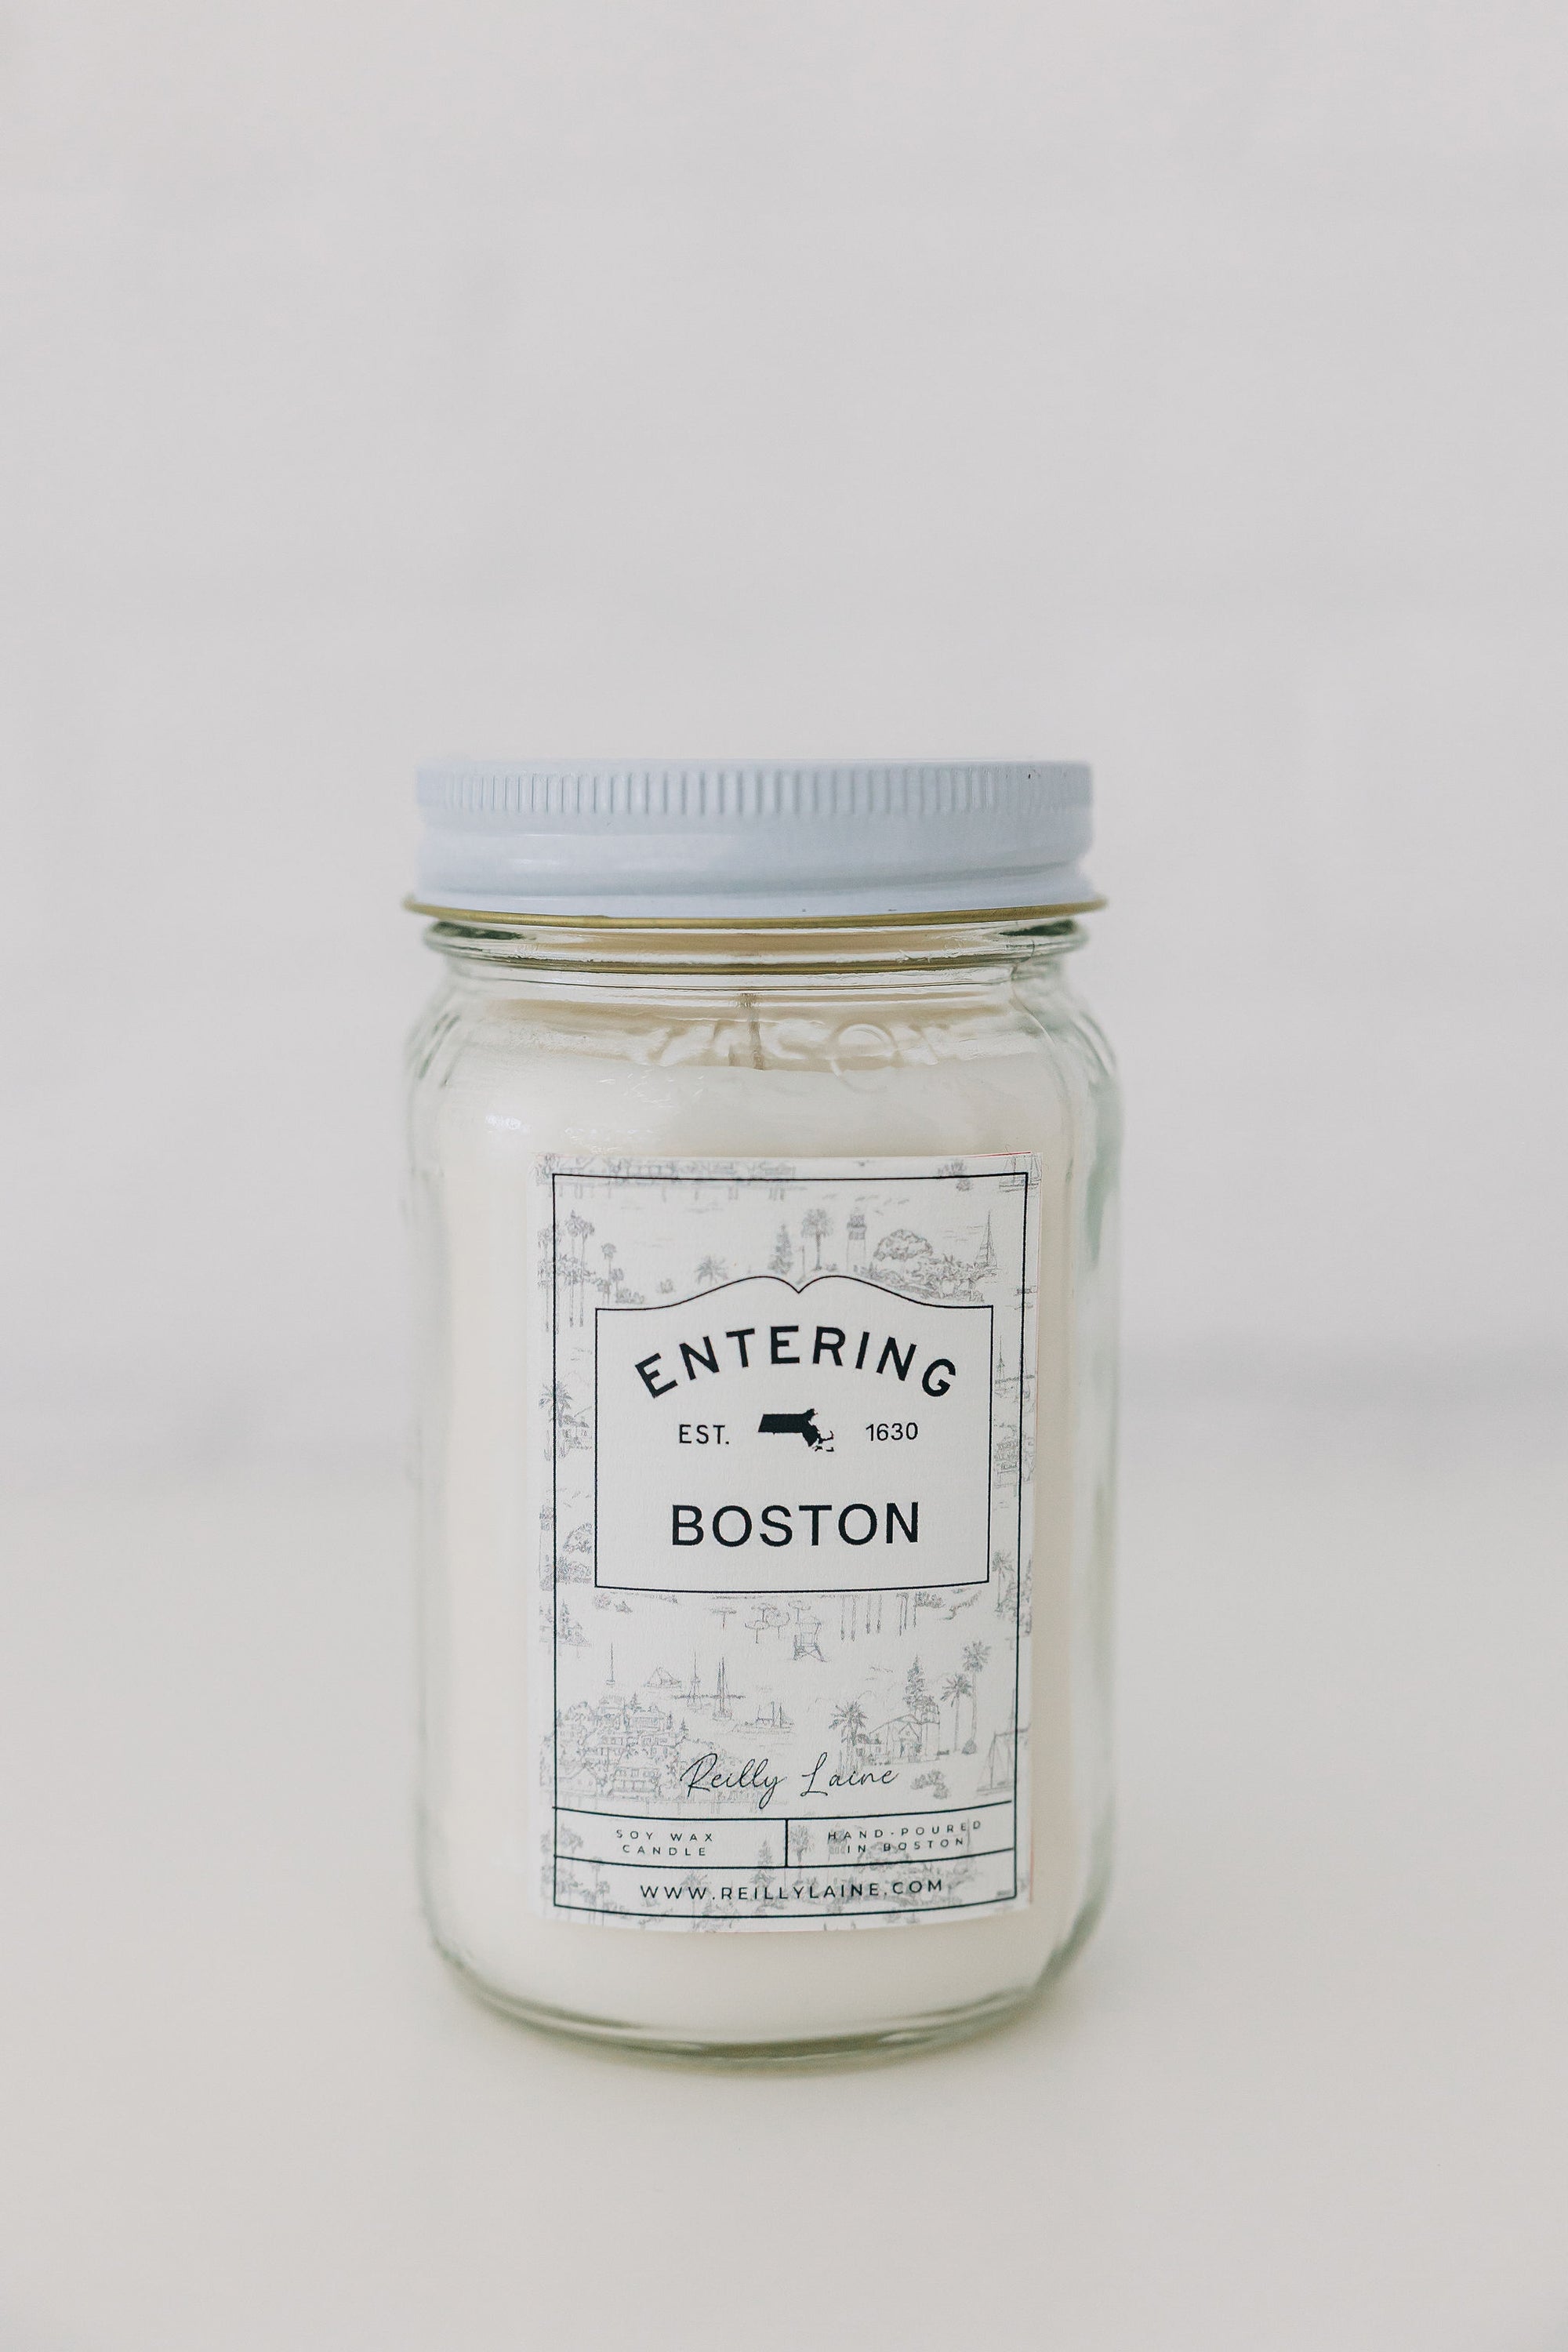 Now Entering: Boston Candle Label